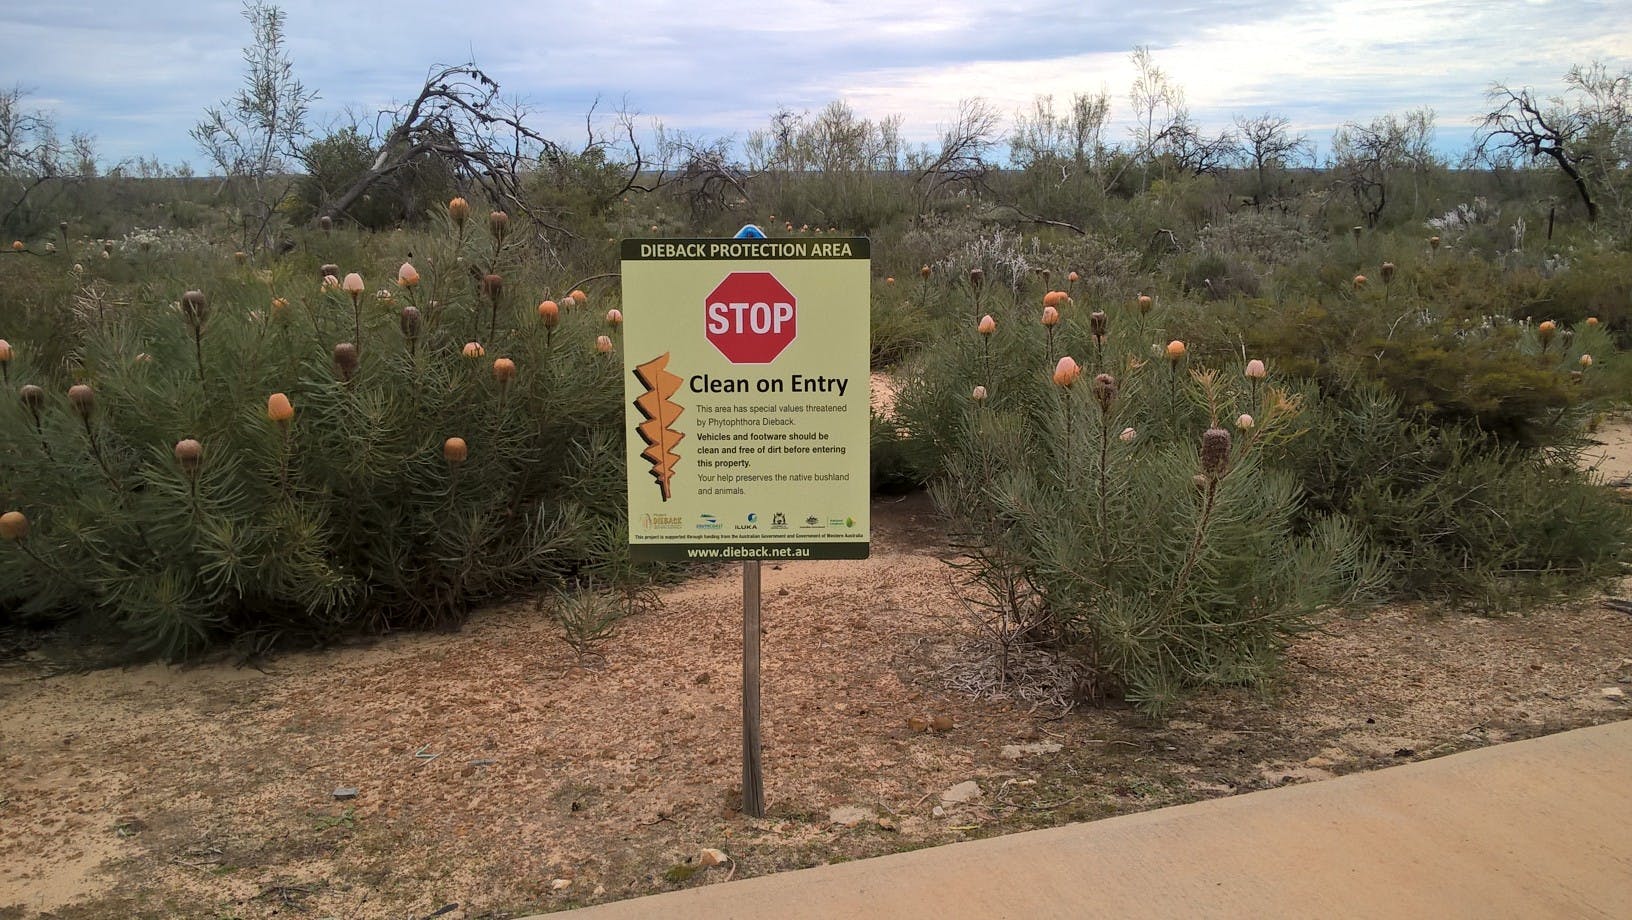 A dieback protection area sign. South Coast Natural Resource Management Inc. received the 2021 Environmental Biosecurity Award